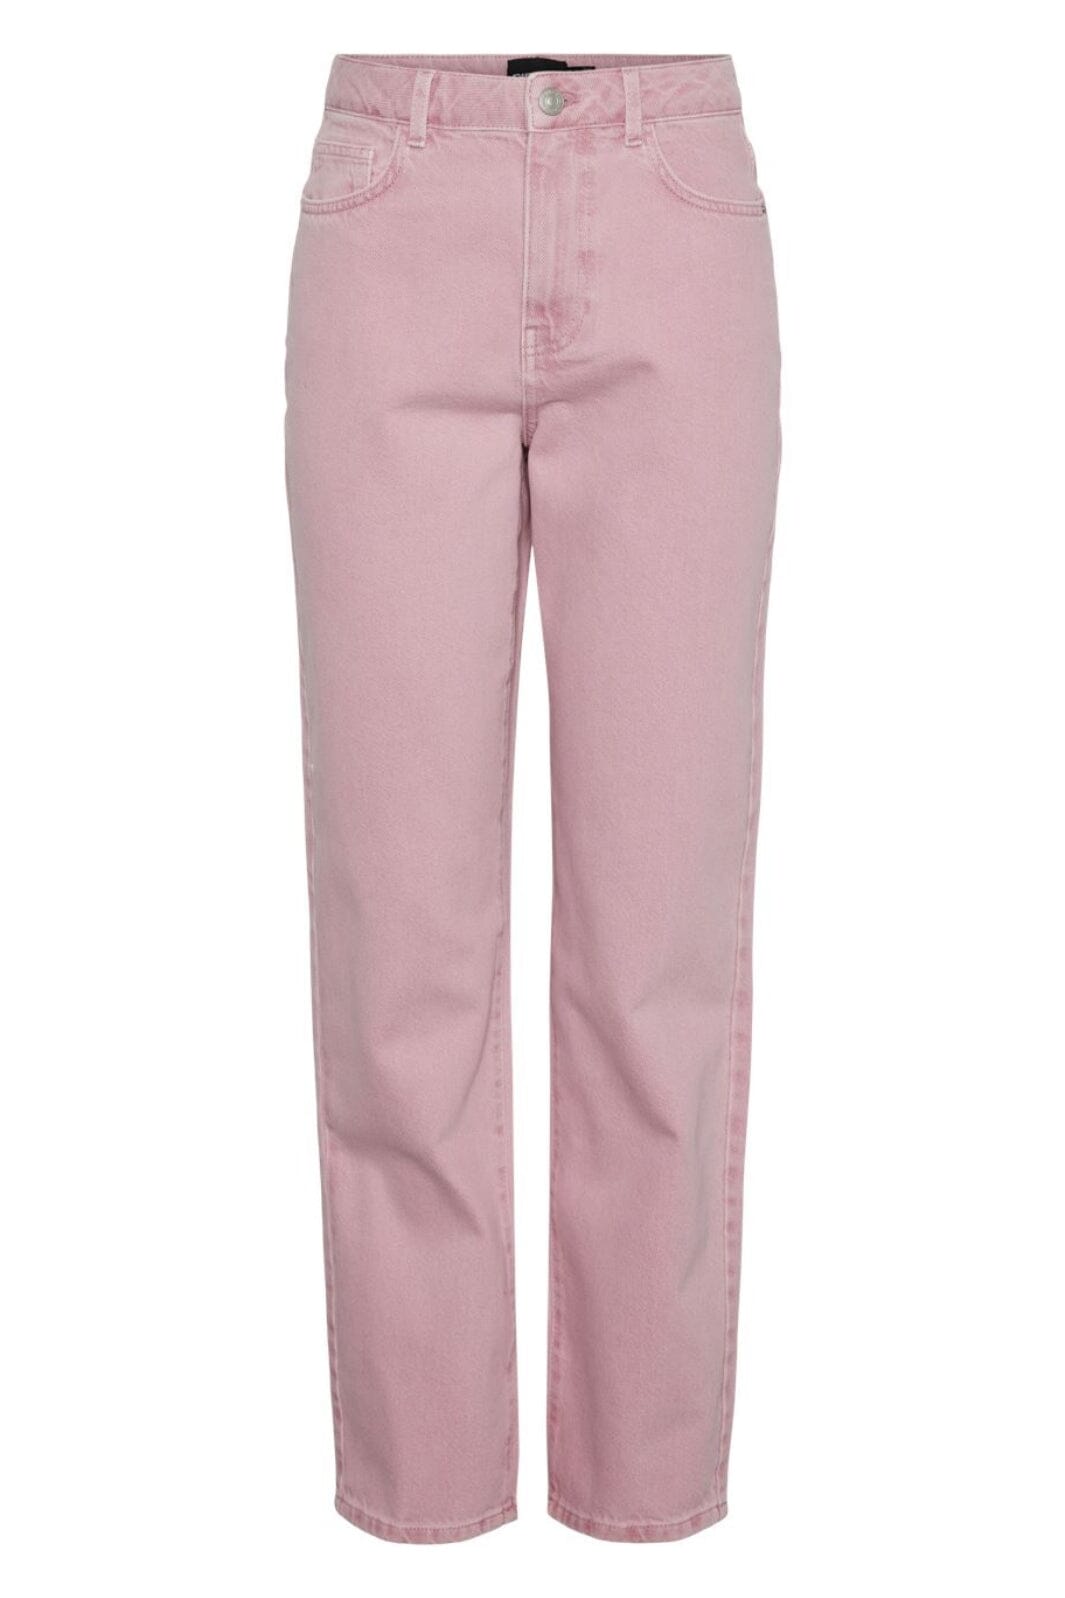 Pieces - Pcfria Straight Denim Pants - 4584190 Candy Pink Washed Bukser 